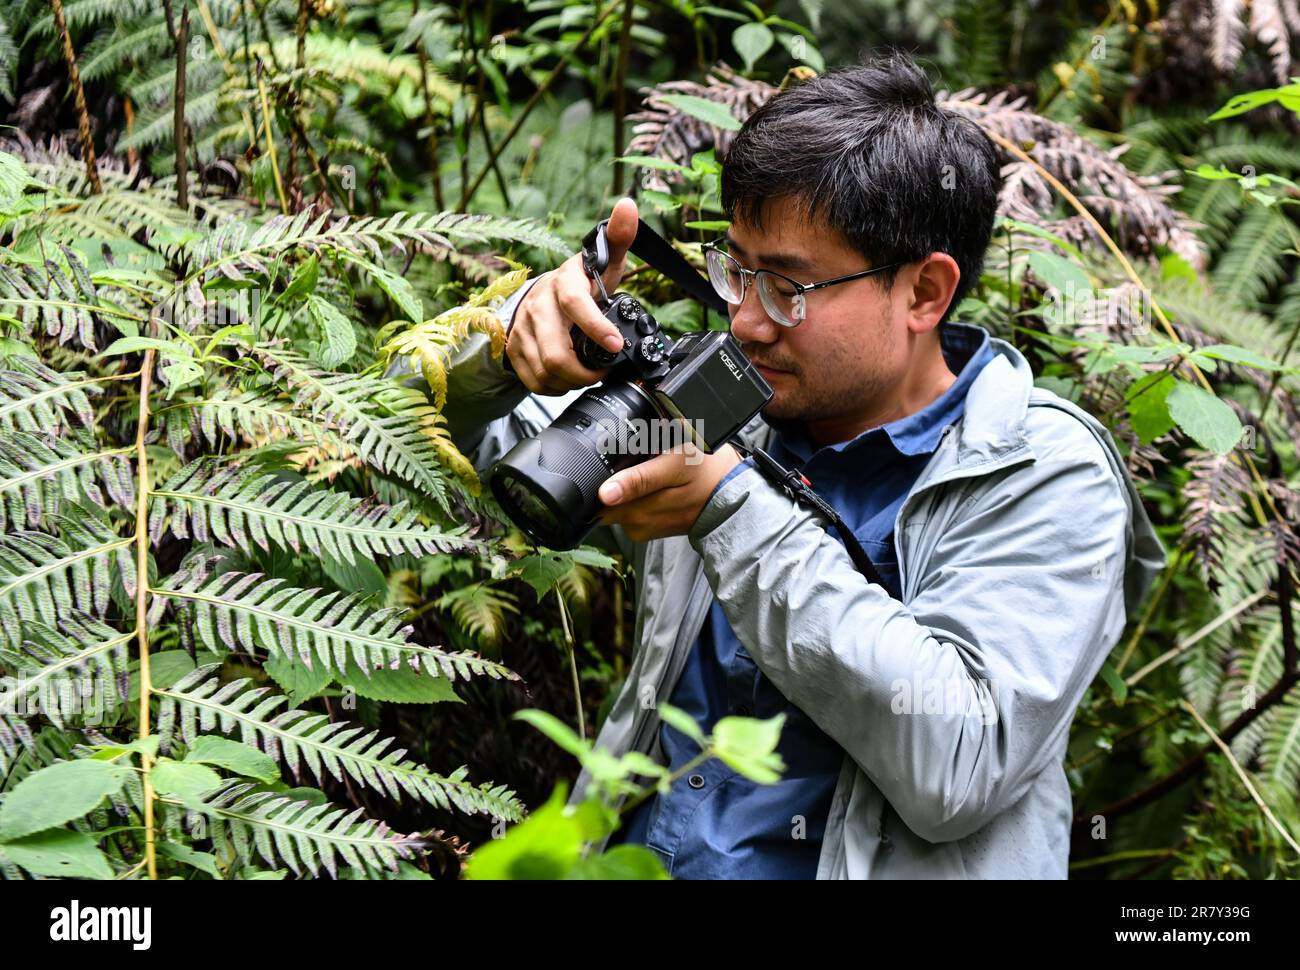 (230618) -- NYINGCHI, June 18, 2023 (Xinhua) -- Wang Zi takes pictures of a Cupressus torulosa sapling at the national nature reserve of the Yarlung Zangbo Grand Canyon in Bome County, Nyingchi City, southwest China's Tibet Autonomous Region, June 15, 2023. The record of the tallest tree in the Chinese mainland has been refreshed several times in the past year or so. Last year in April, a research team led by Peking University found a 76.8-meter tree in Medog County in southwest China's Tibet Autonomous Region, marking China's tallest tree at the time. The record was broken a month later when Stock Photo